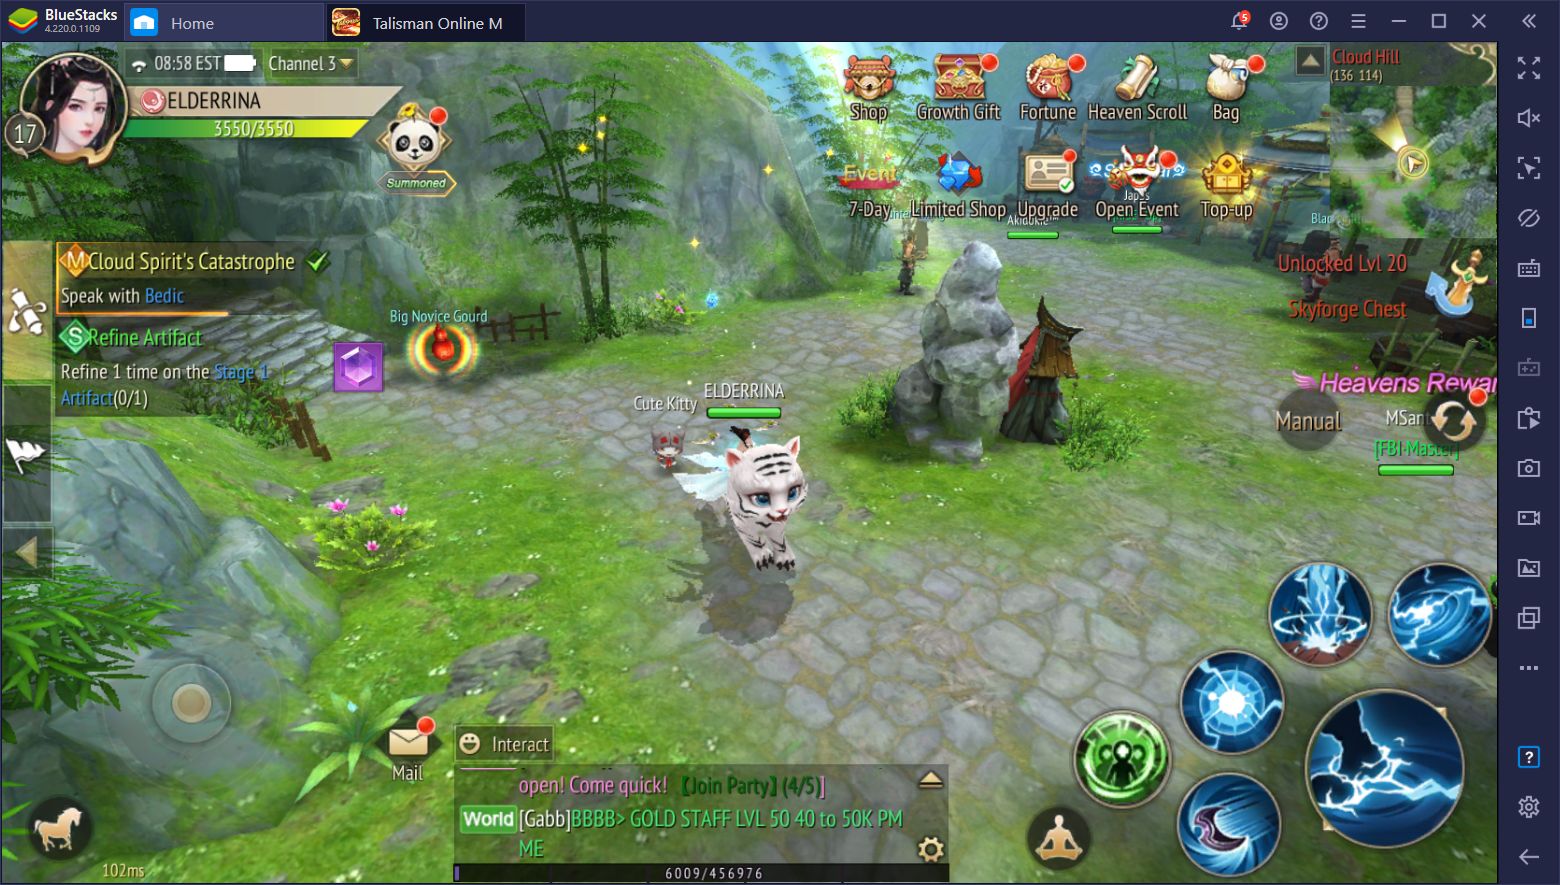 Talisman Online M on PC - How to Install and Play This New Mobile MMORPG on  PC